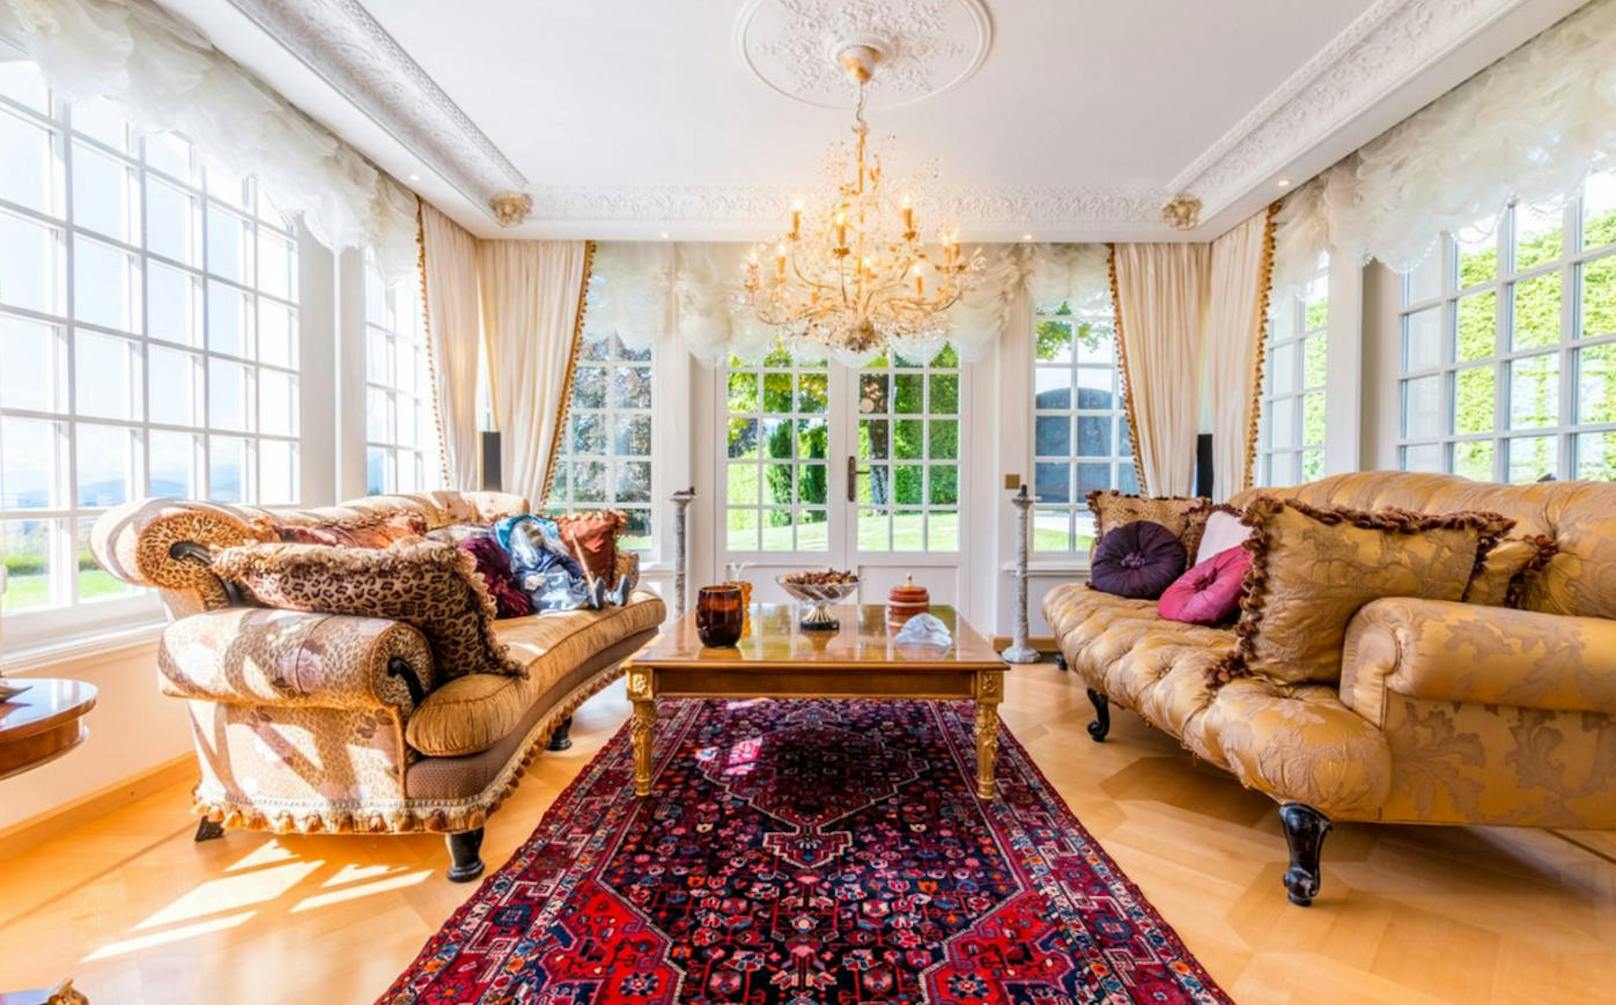 Preis: 14,1 Millionen Euro. <a href="https://www.sothebysrealty.com/eng/sales/detail/180-l-527-hnjglg/luxurious-six-bedroom-property-with-stunning-panoramic-view-begnins-vd-1268">Jetzt zuschlagen?</a>